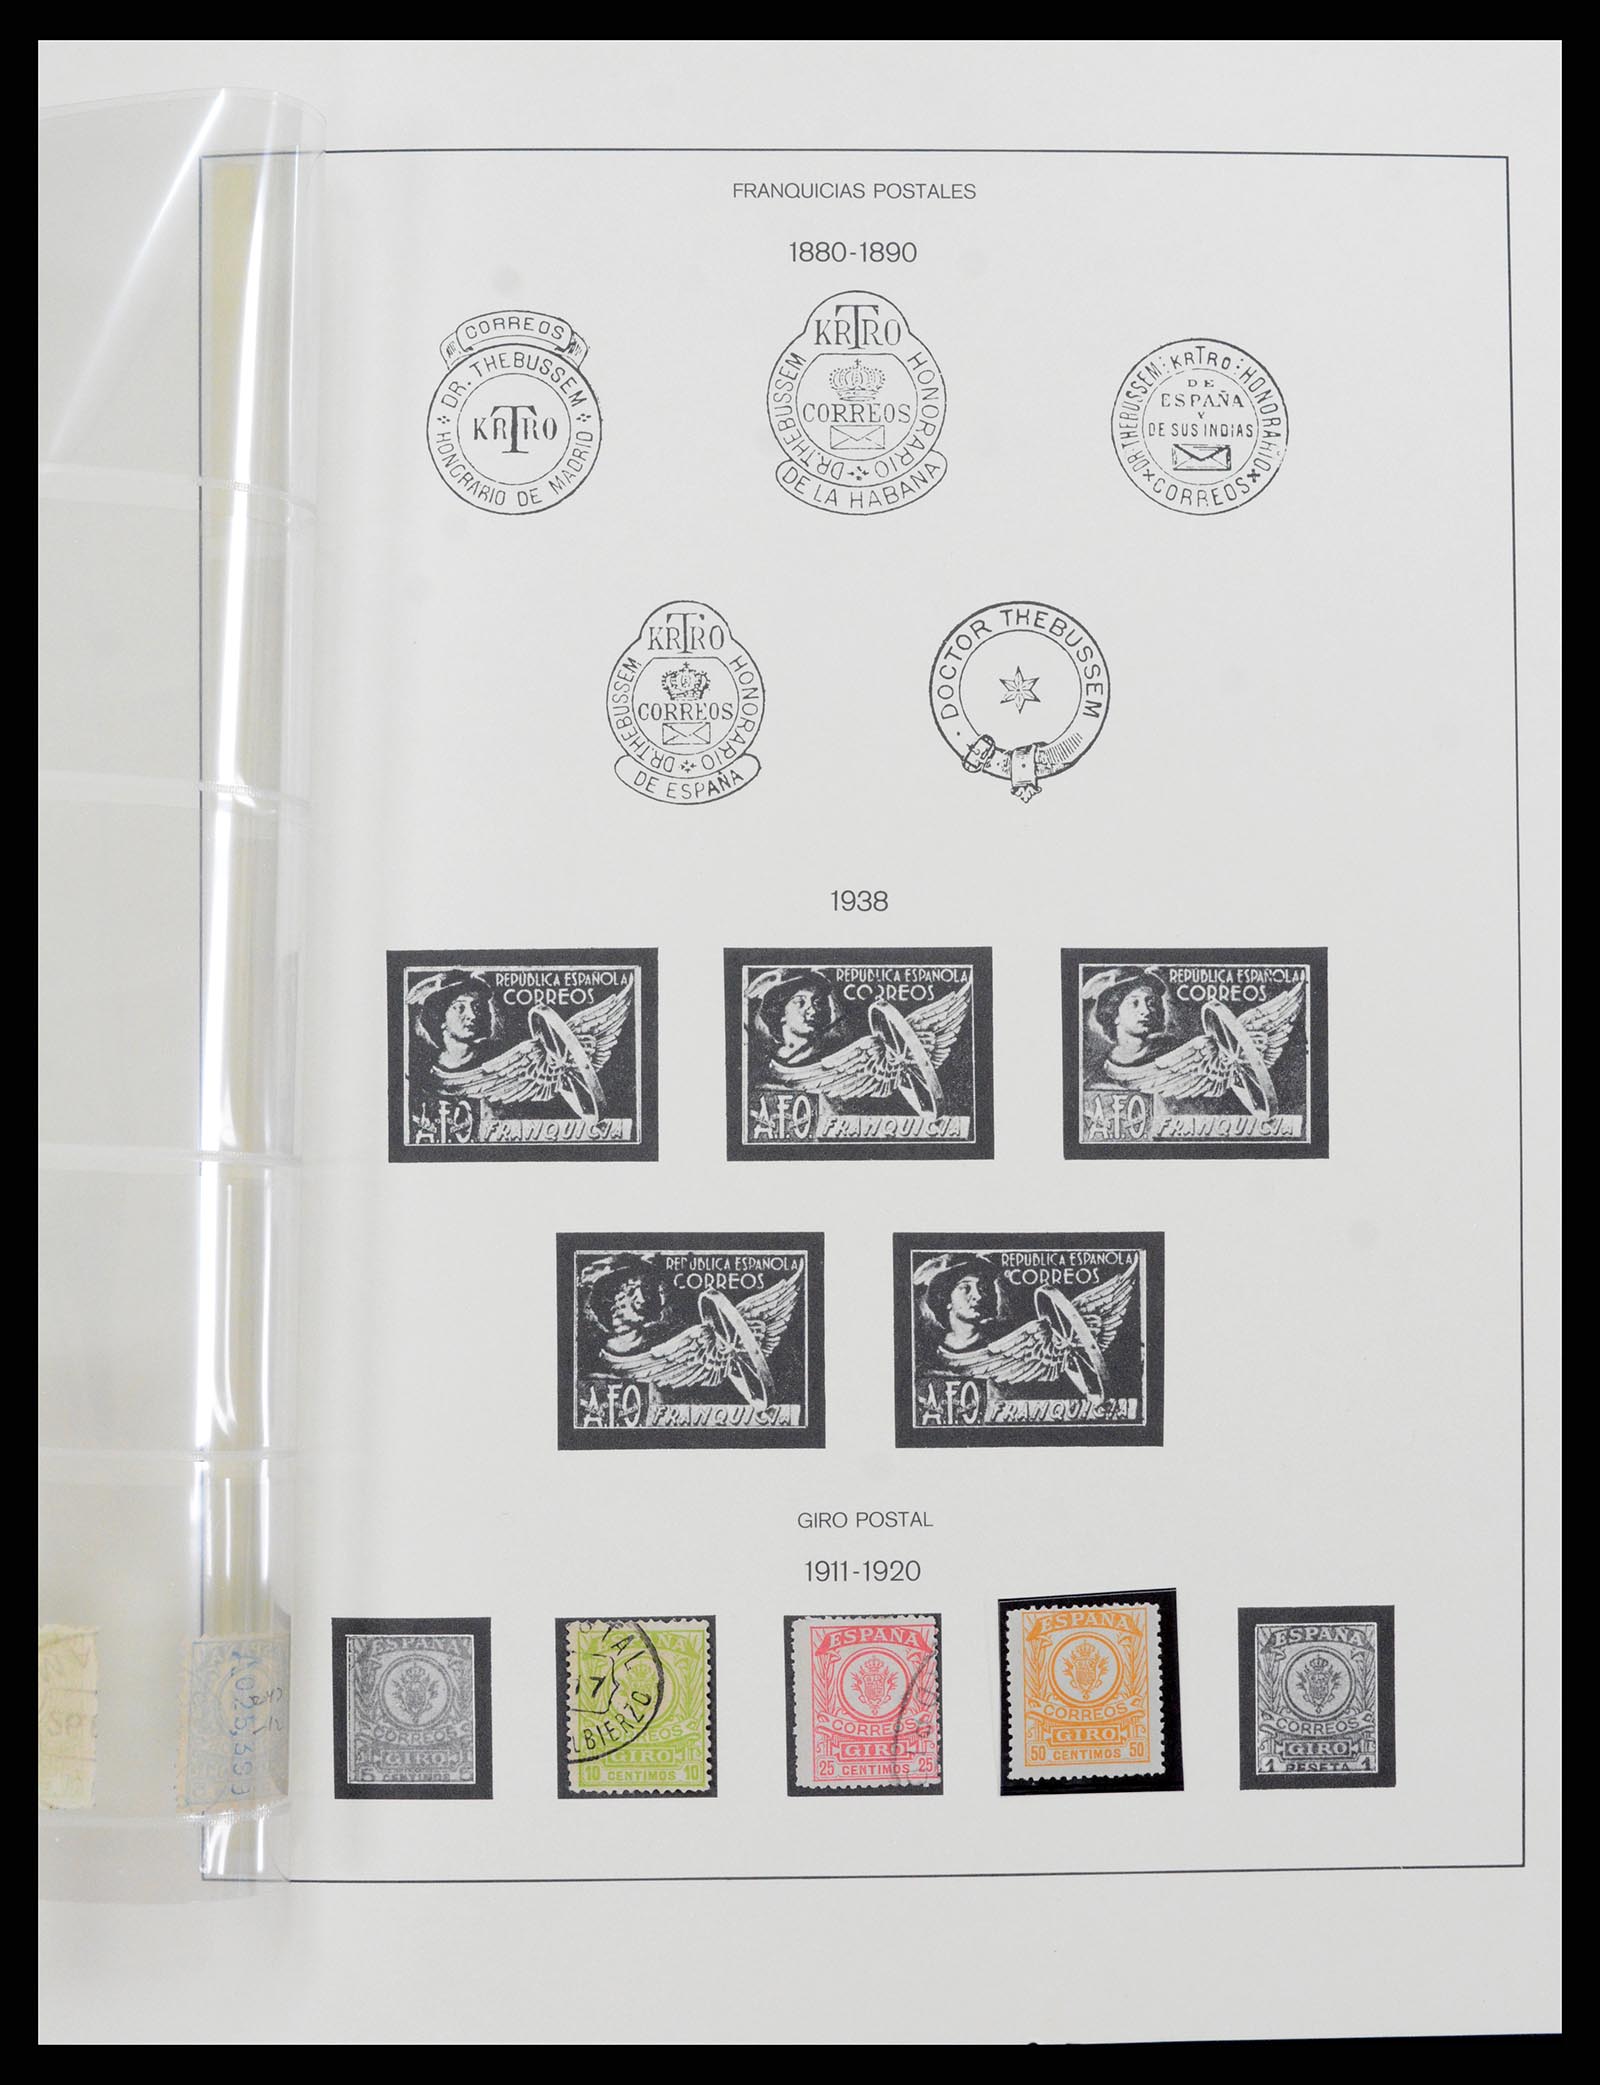 37126 093 - Stamp collection 37126 Spain and colonies 1850-1976.